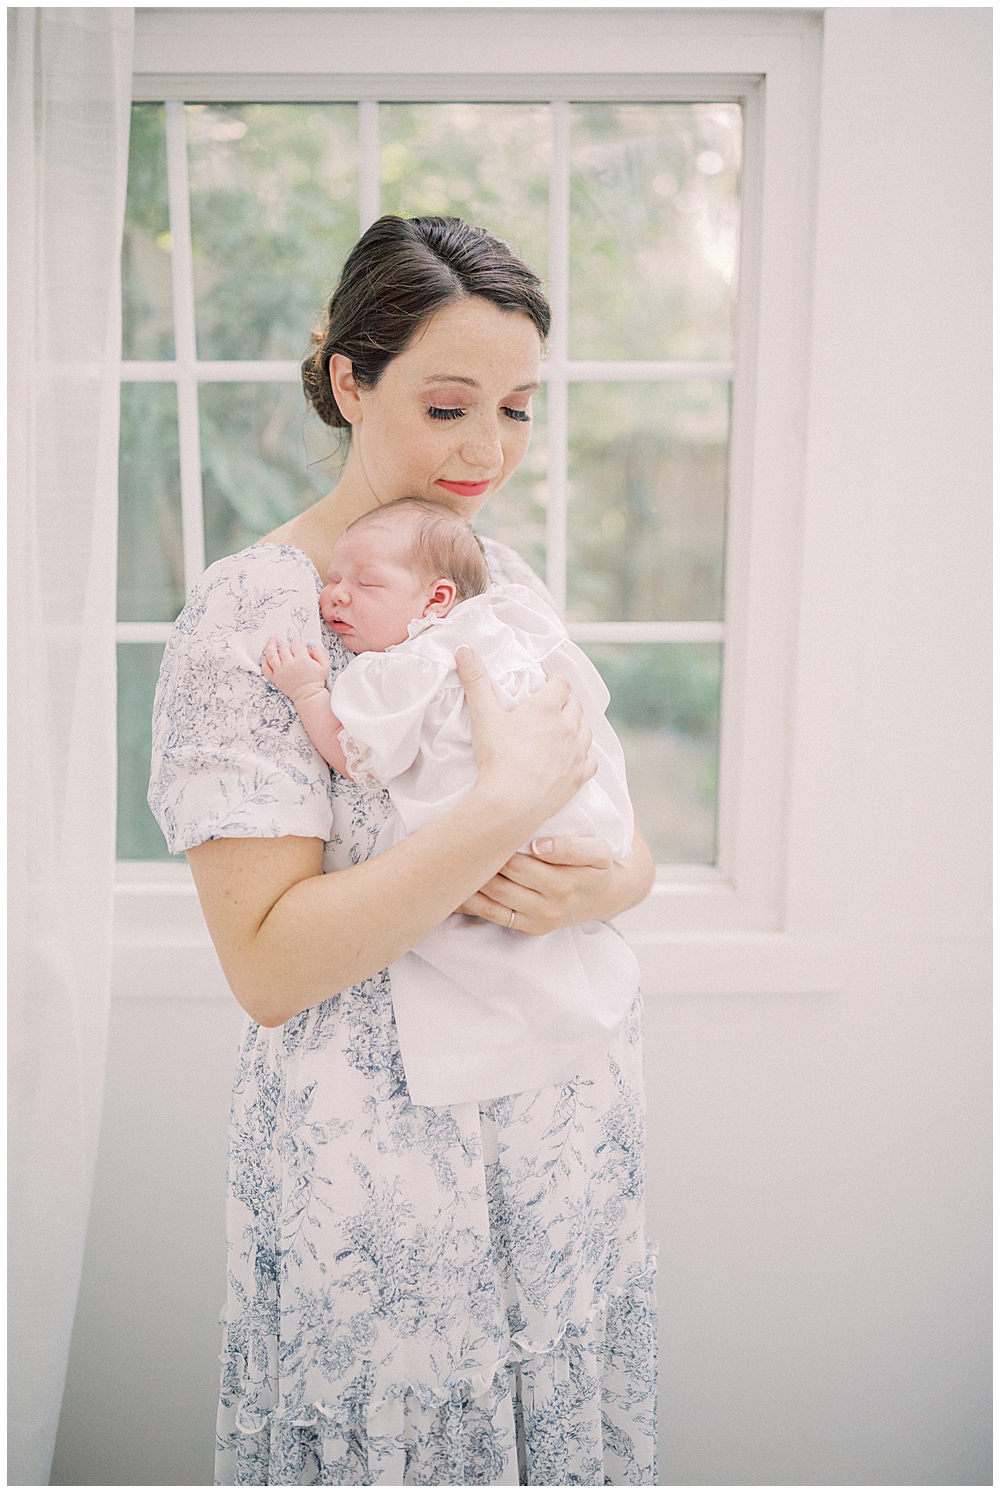 M other holds her newborn daughter up to her chest while standing in front of a window